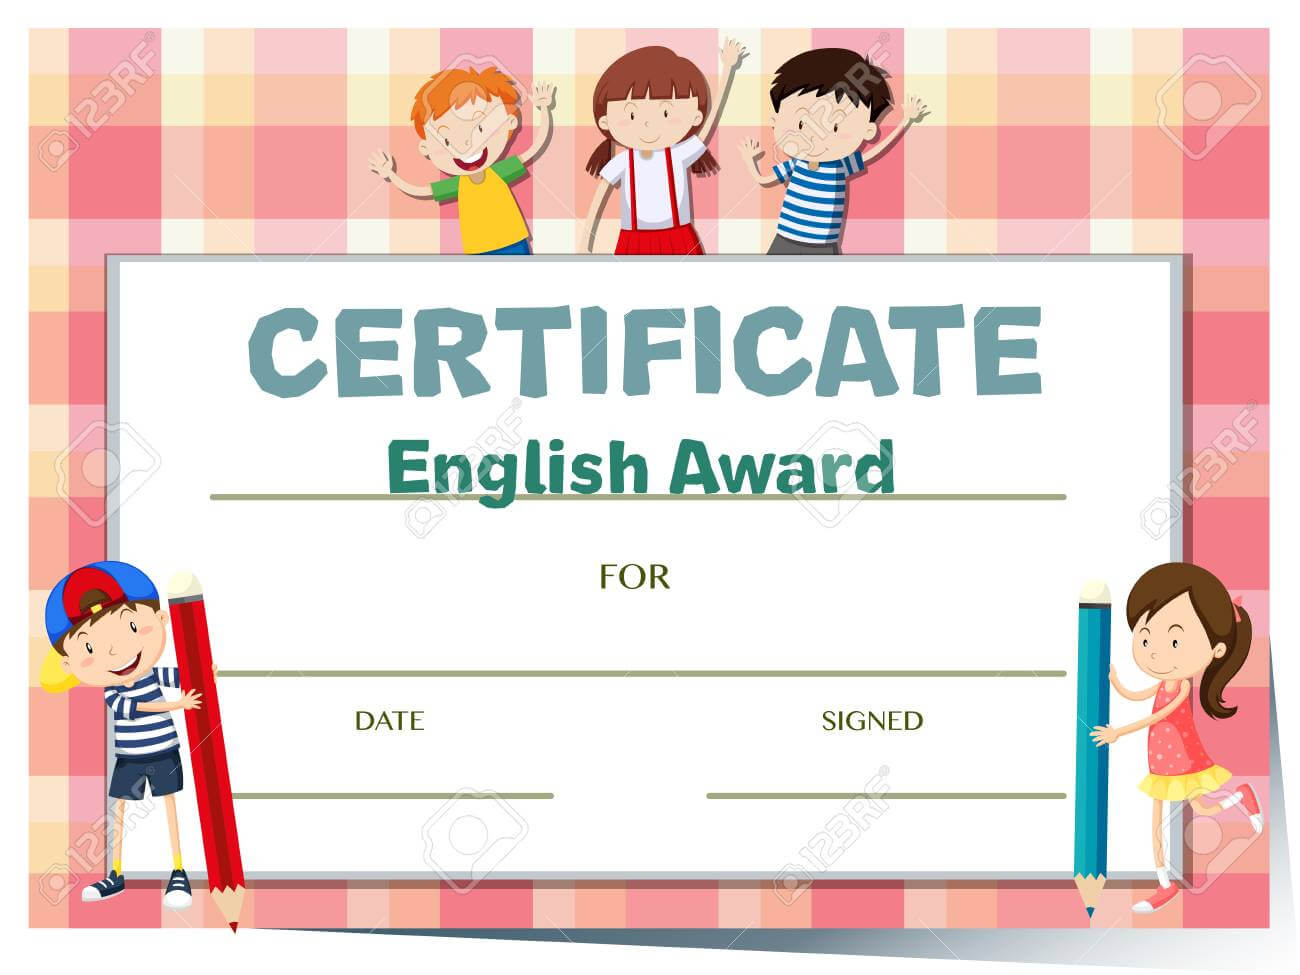 Certificate Template For English Award With Many Kids Illustration Regarding Children's Certificate Template